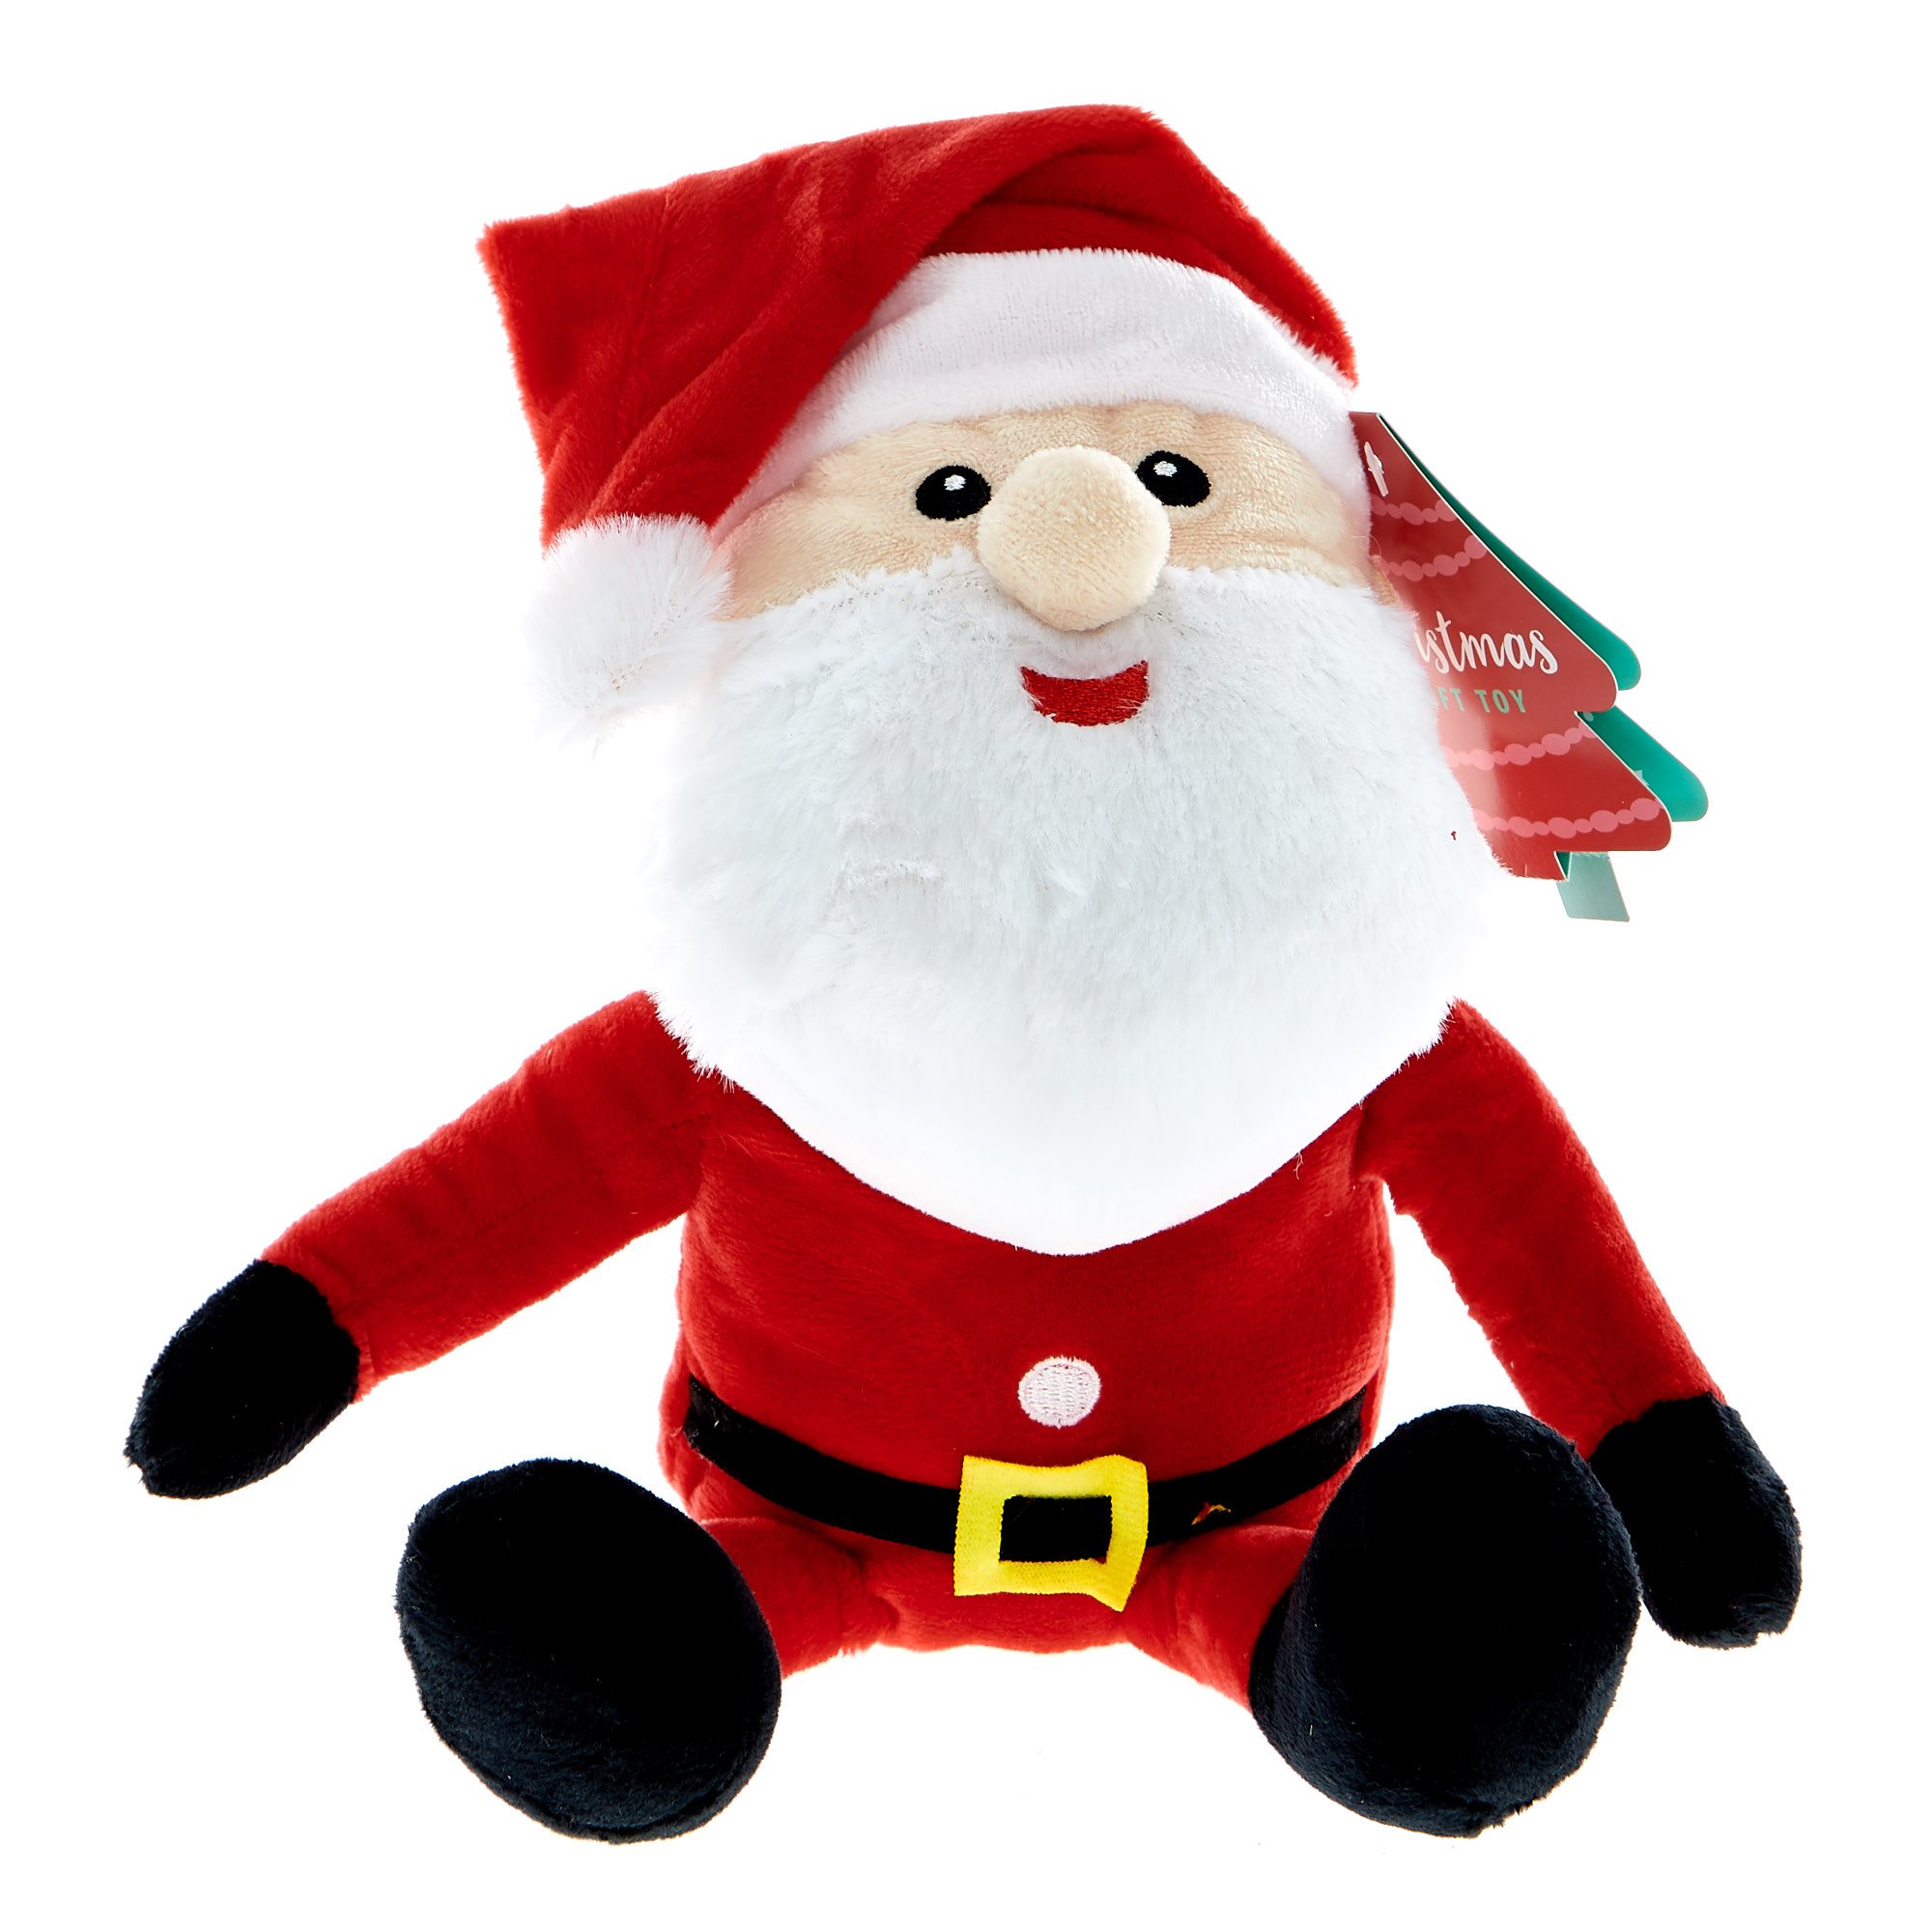 Buy Santa Claus Christmas Soft Toy for GBP 1.99 Card Factory UK